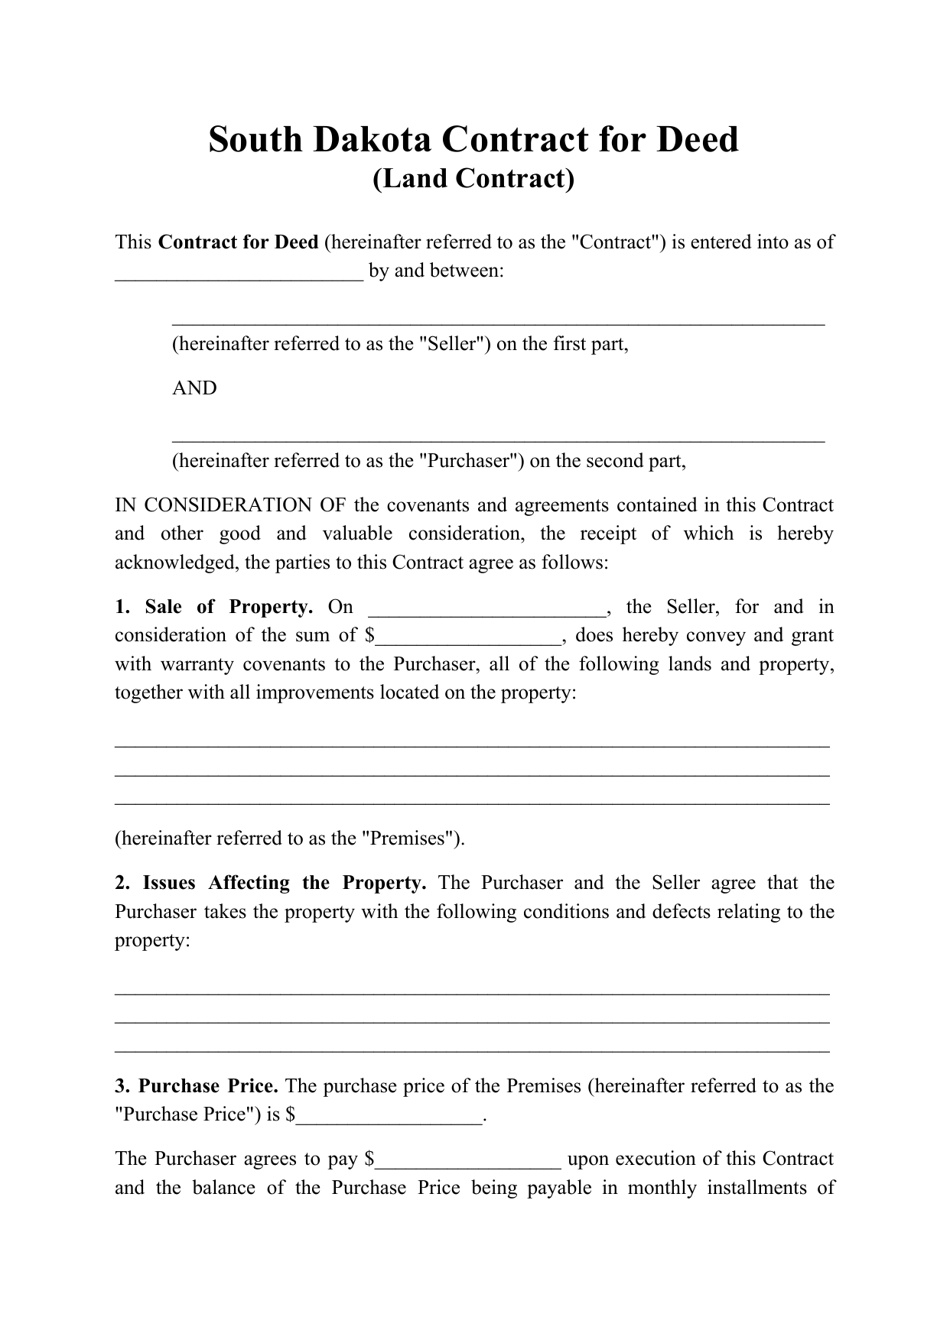 Contract for Deed (Land Contract) - South Dakota, Page 1